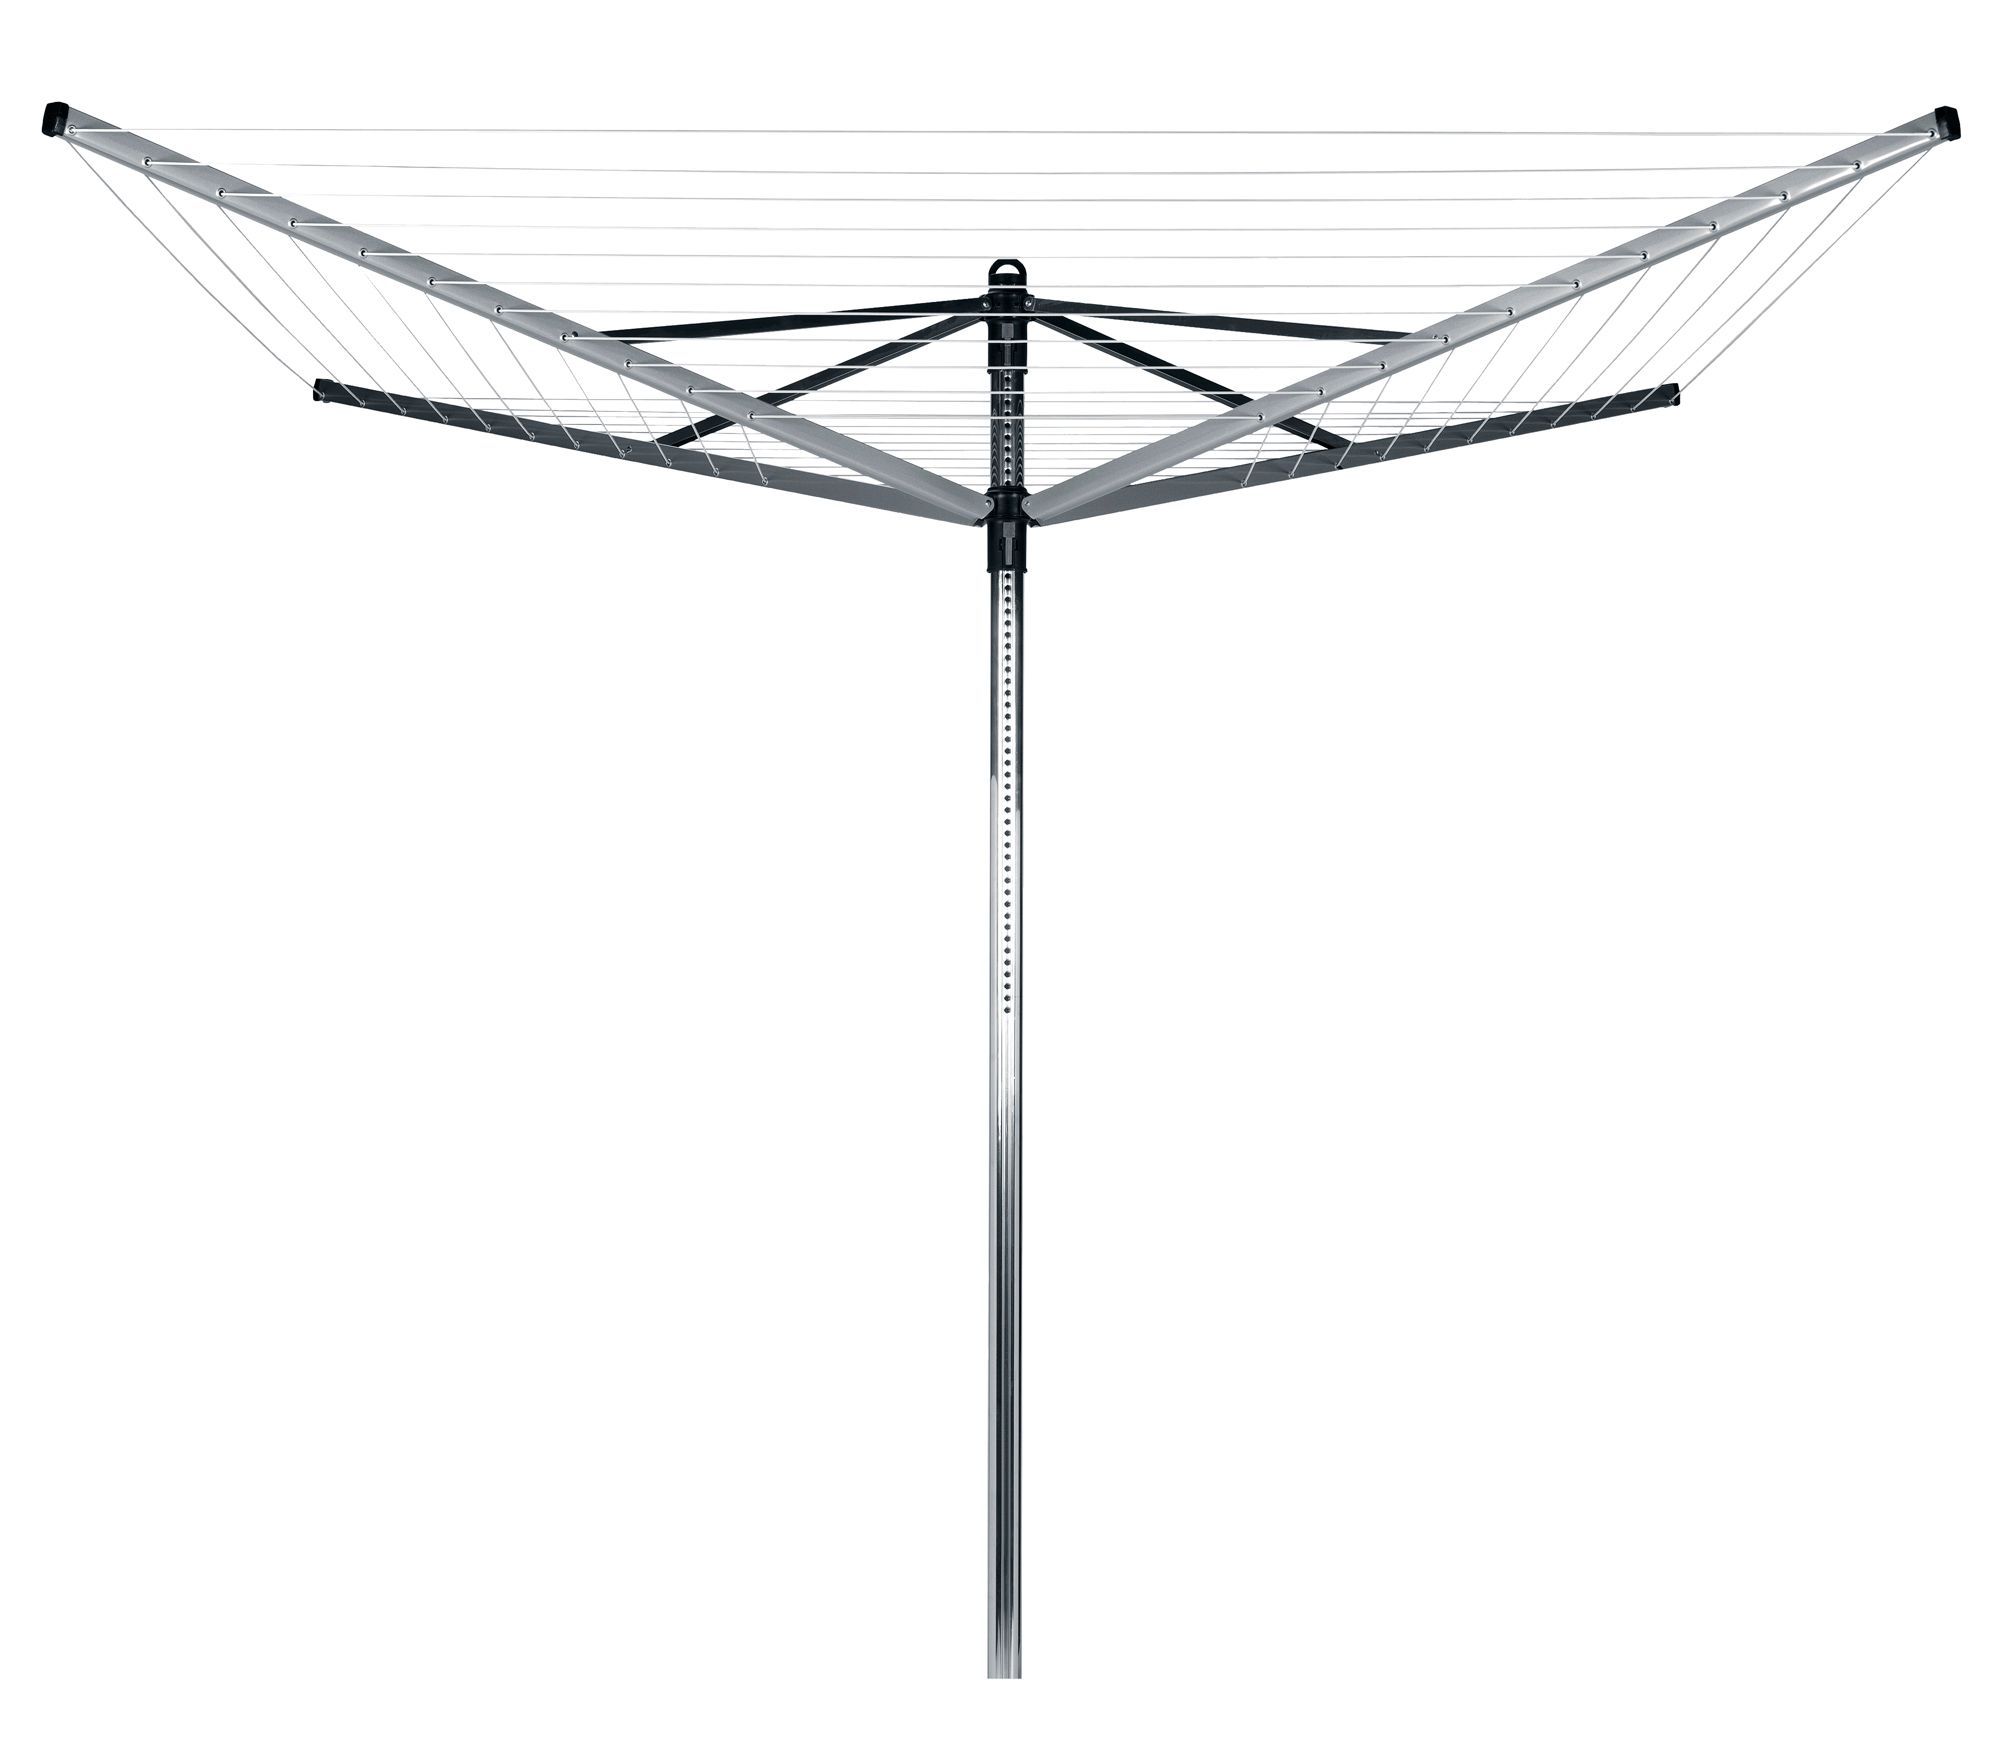 Brabantia Silver effect Rotary airer, 60m